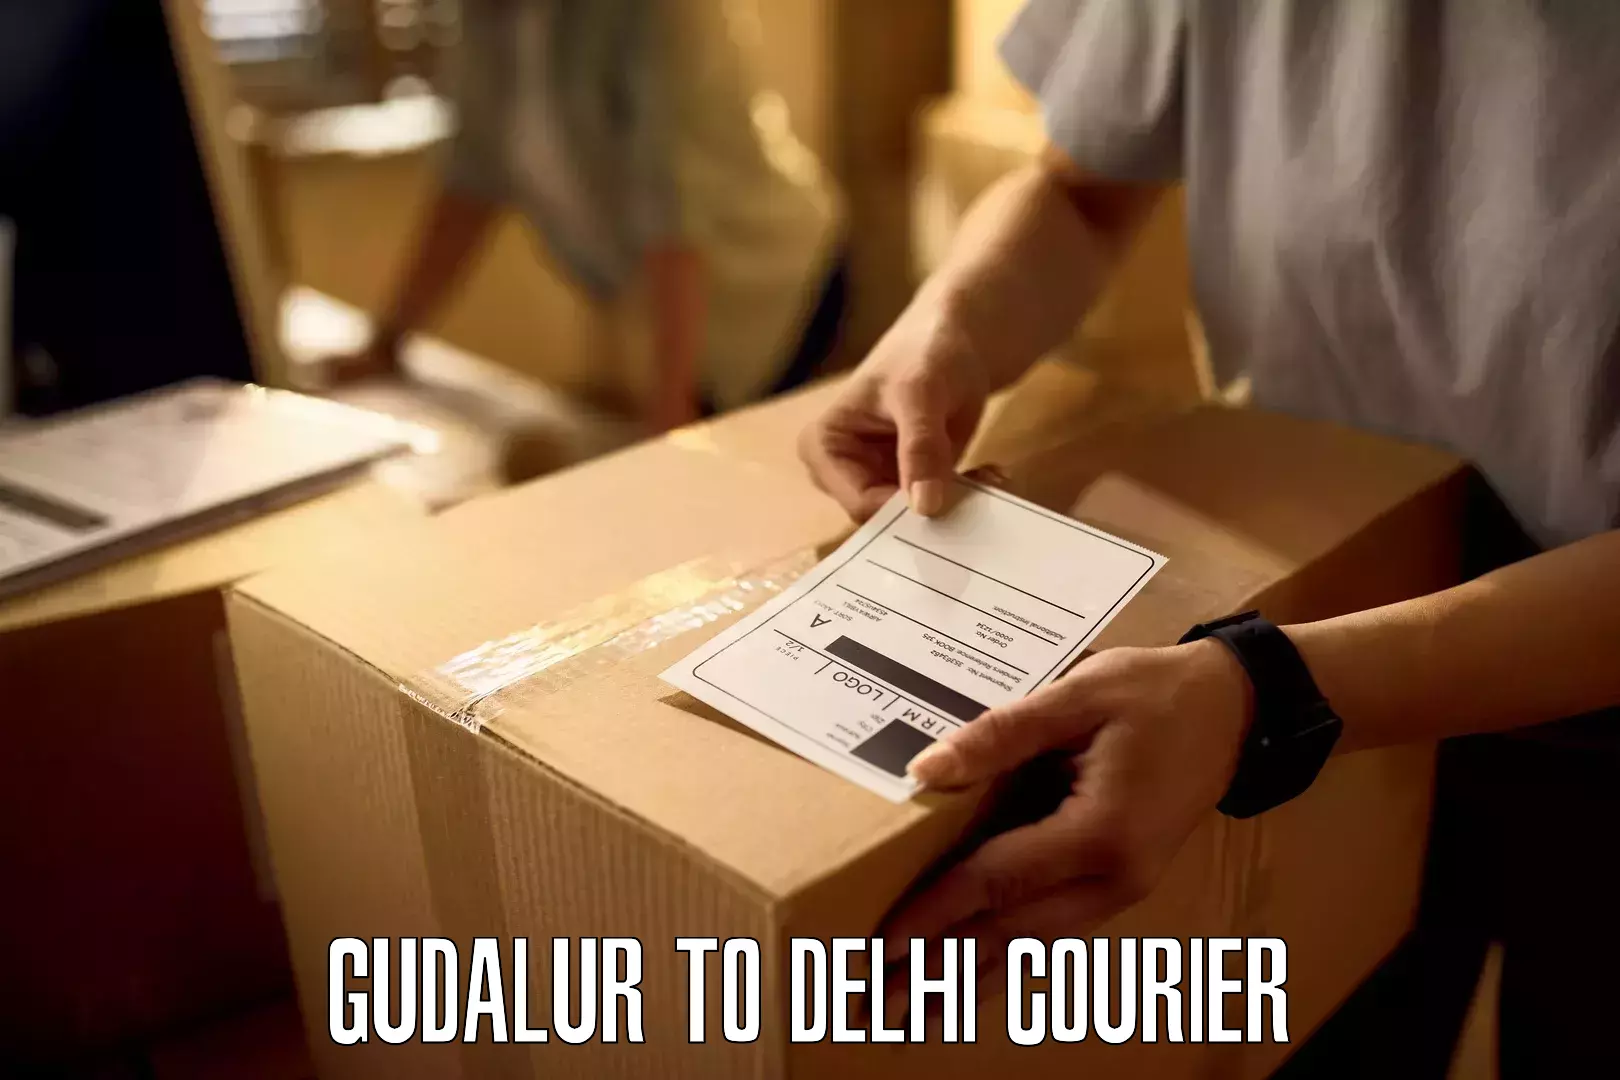 Fast-track shipping solutions Gudalur to NCR